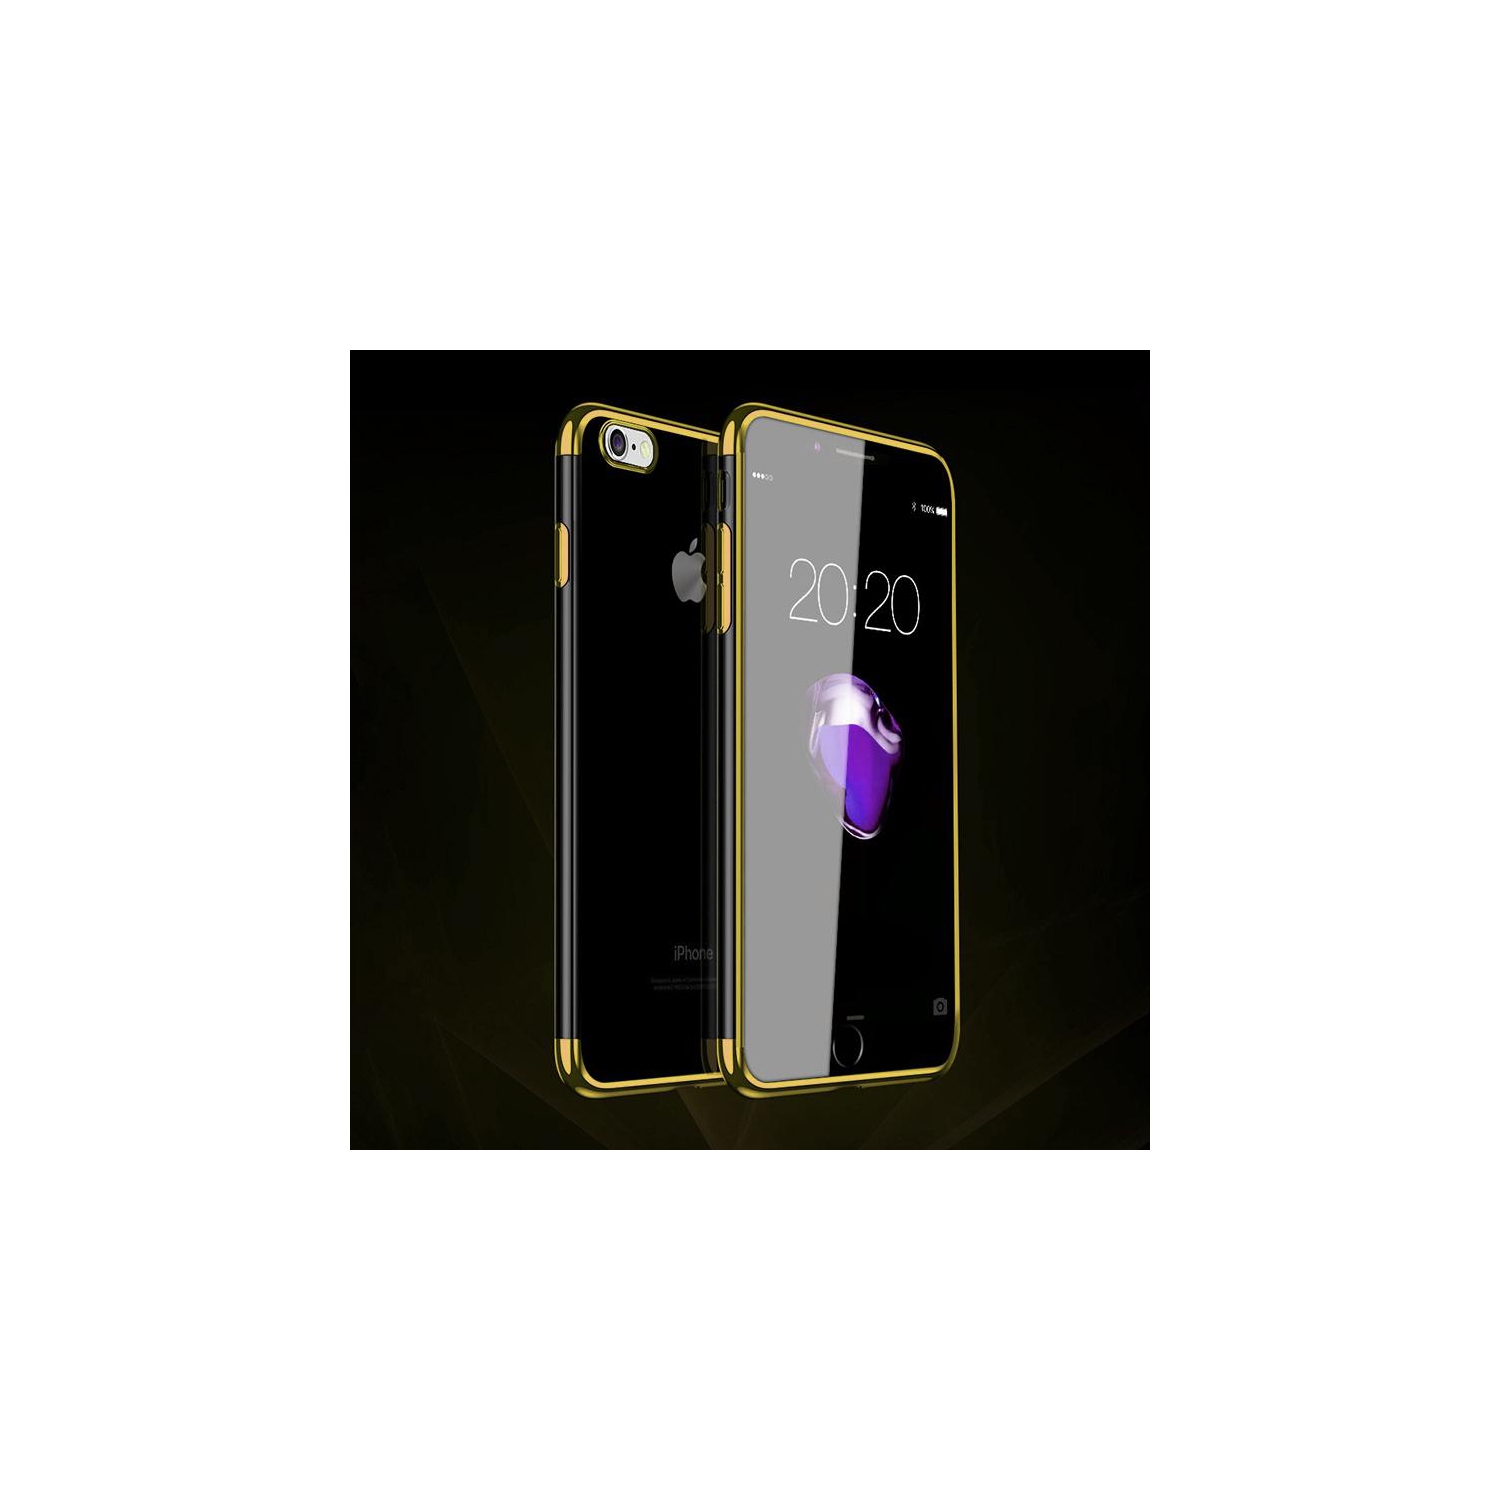 PANDACO Gold Trim Clear Case for iPhone 6 Plus or iPhone 6s Plus